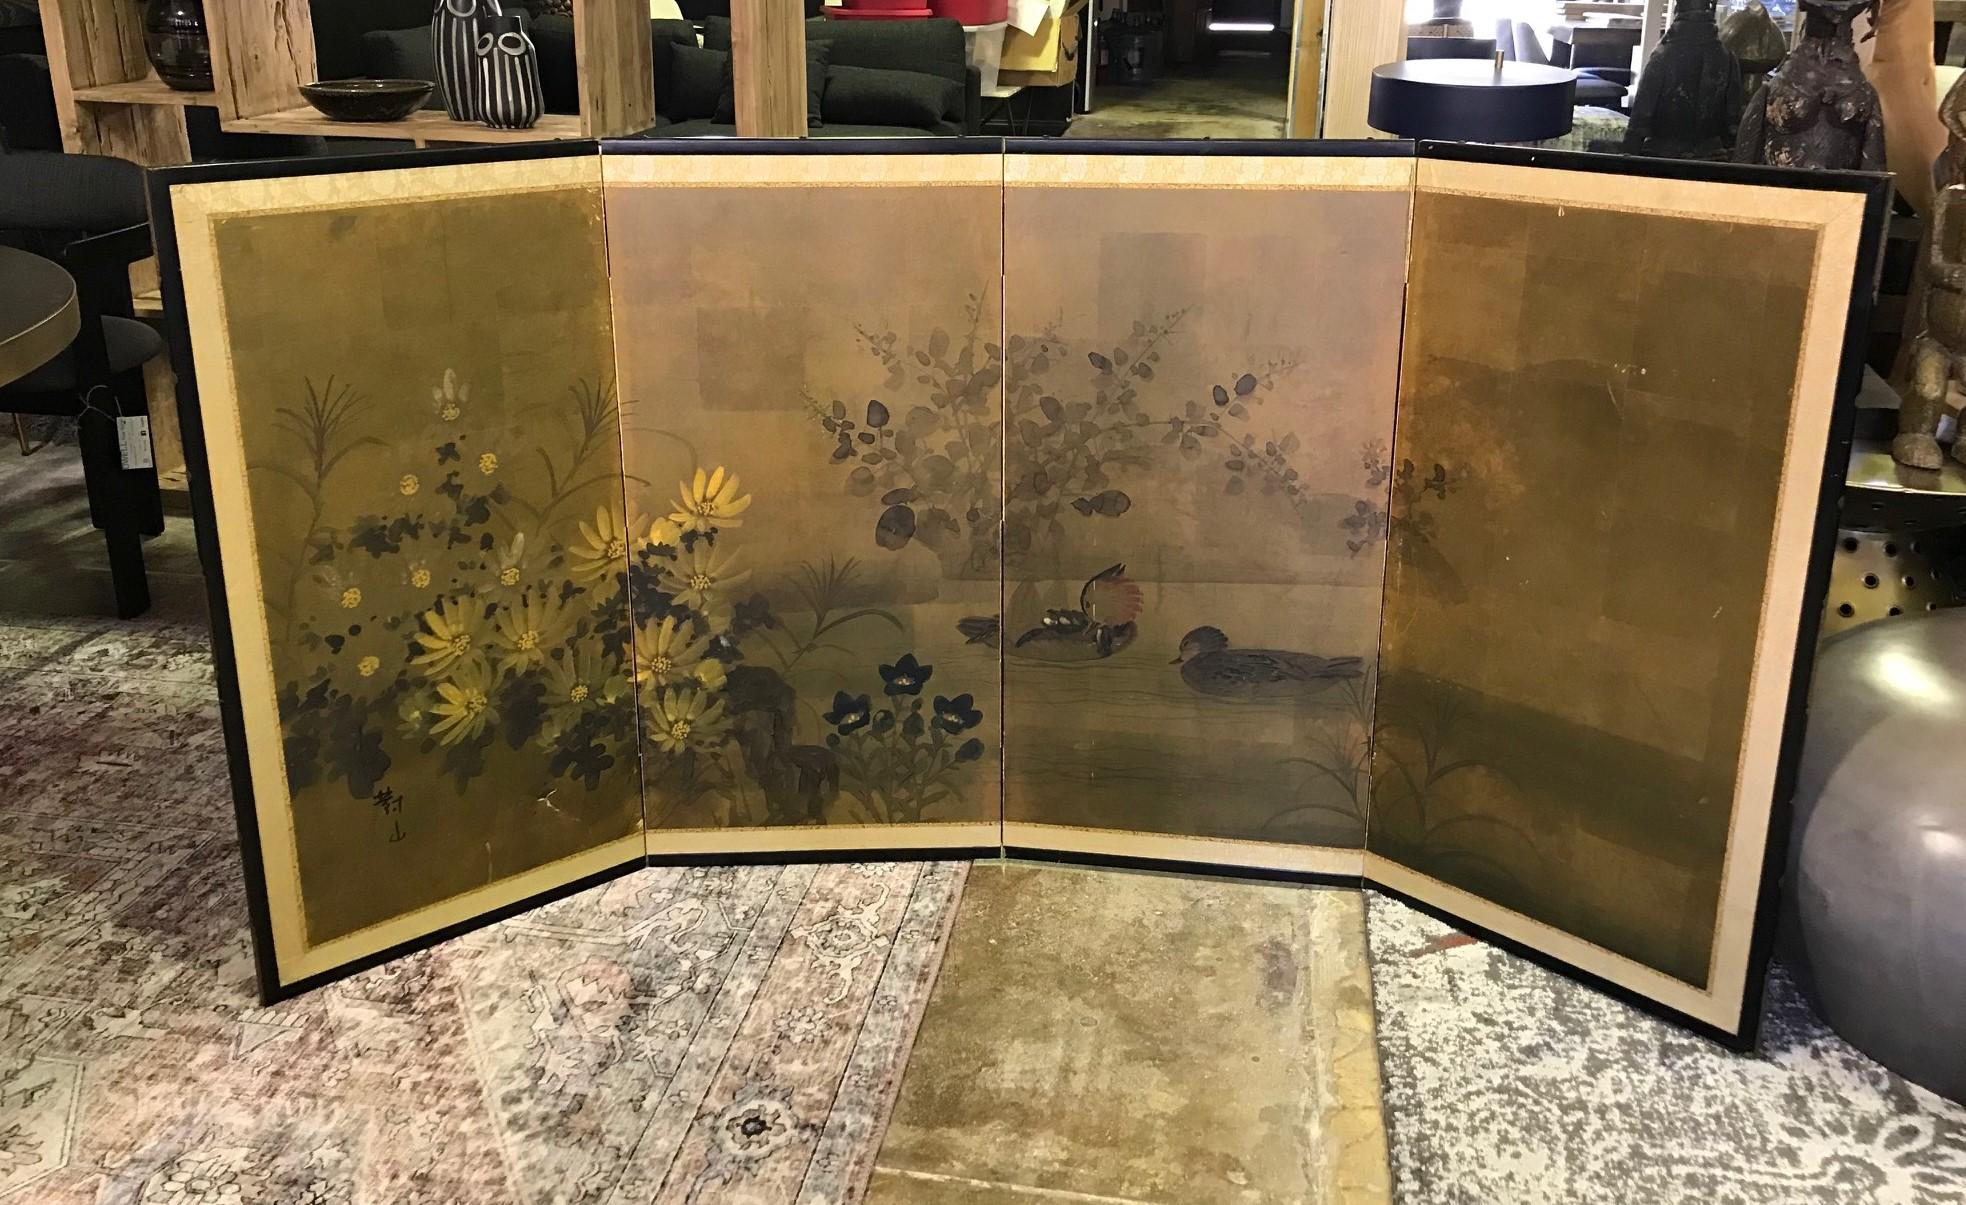 A gorgeous four-panel Japanese Byobu folding screen depicting two ducks on a tranquil pond with colorful floral landscape touches. The rich colors, gold leaf, and beautiful hand painted detail really makes this an attractive work.

Original